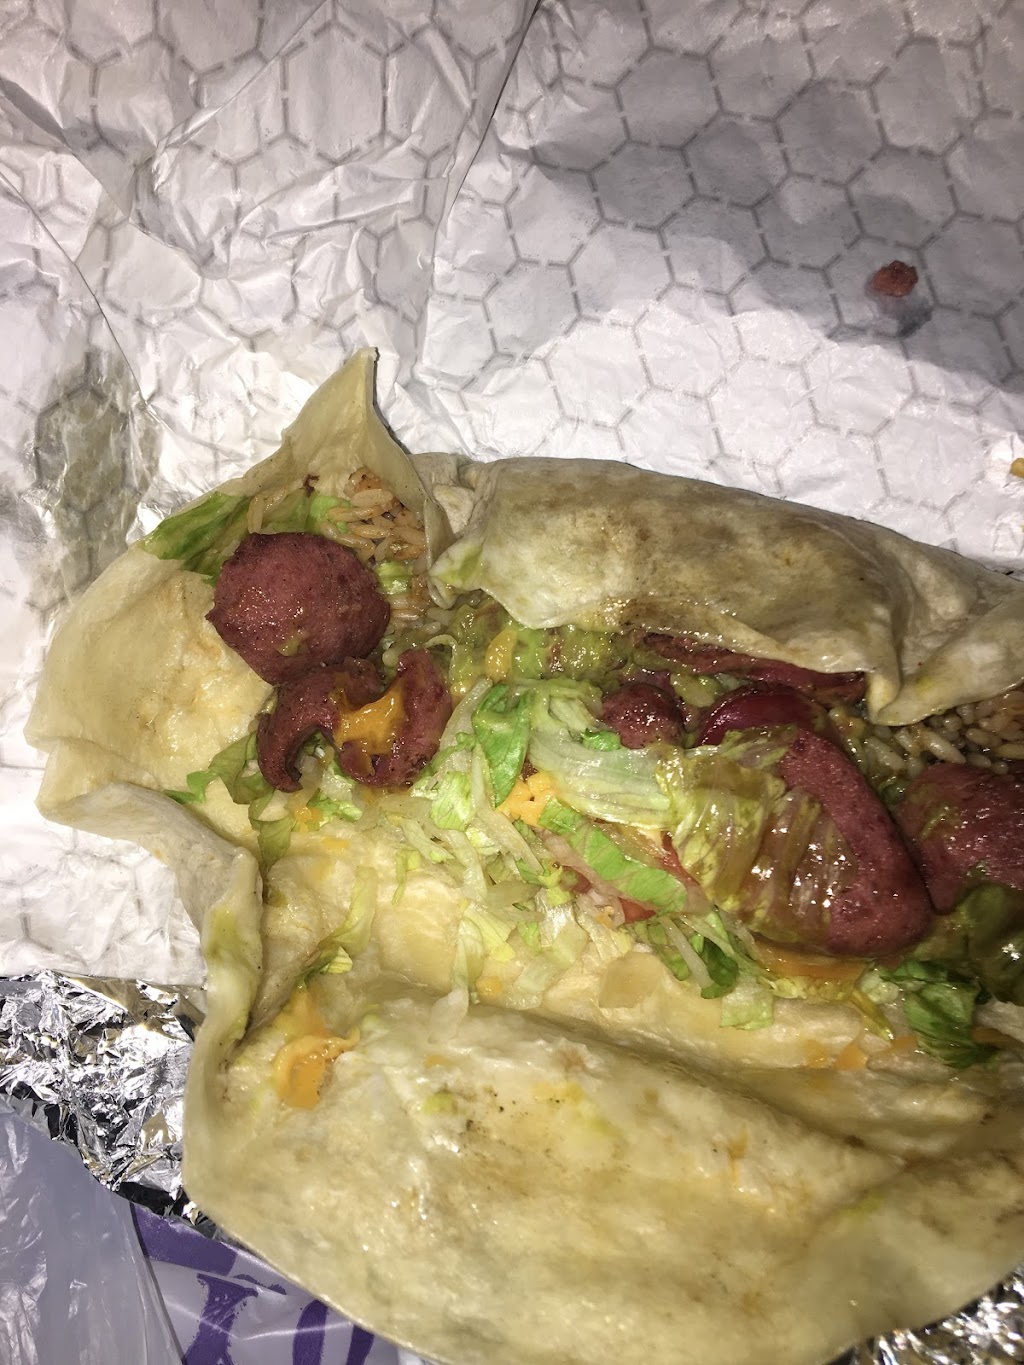 Jesus Taco | meal delivery | 501 W 145th St, New York, NY 10031, USA | 2122343330 OR +1 212-234-3330